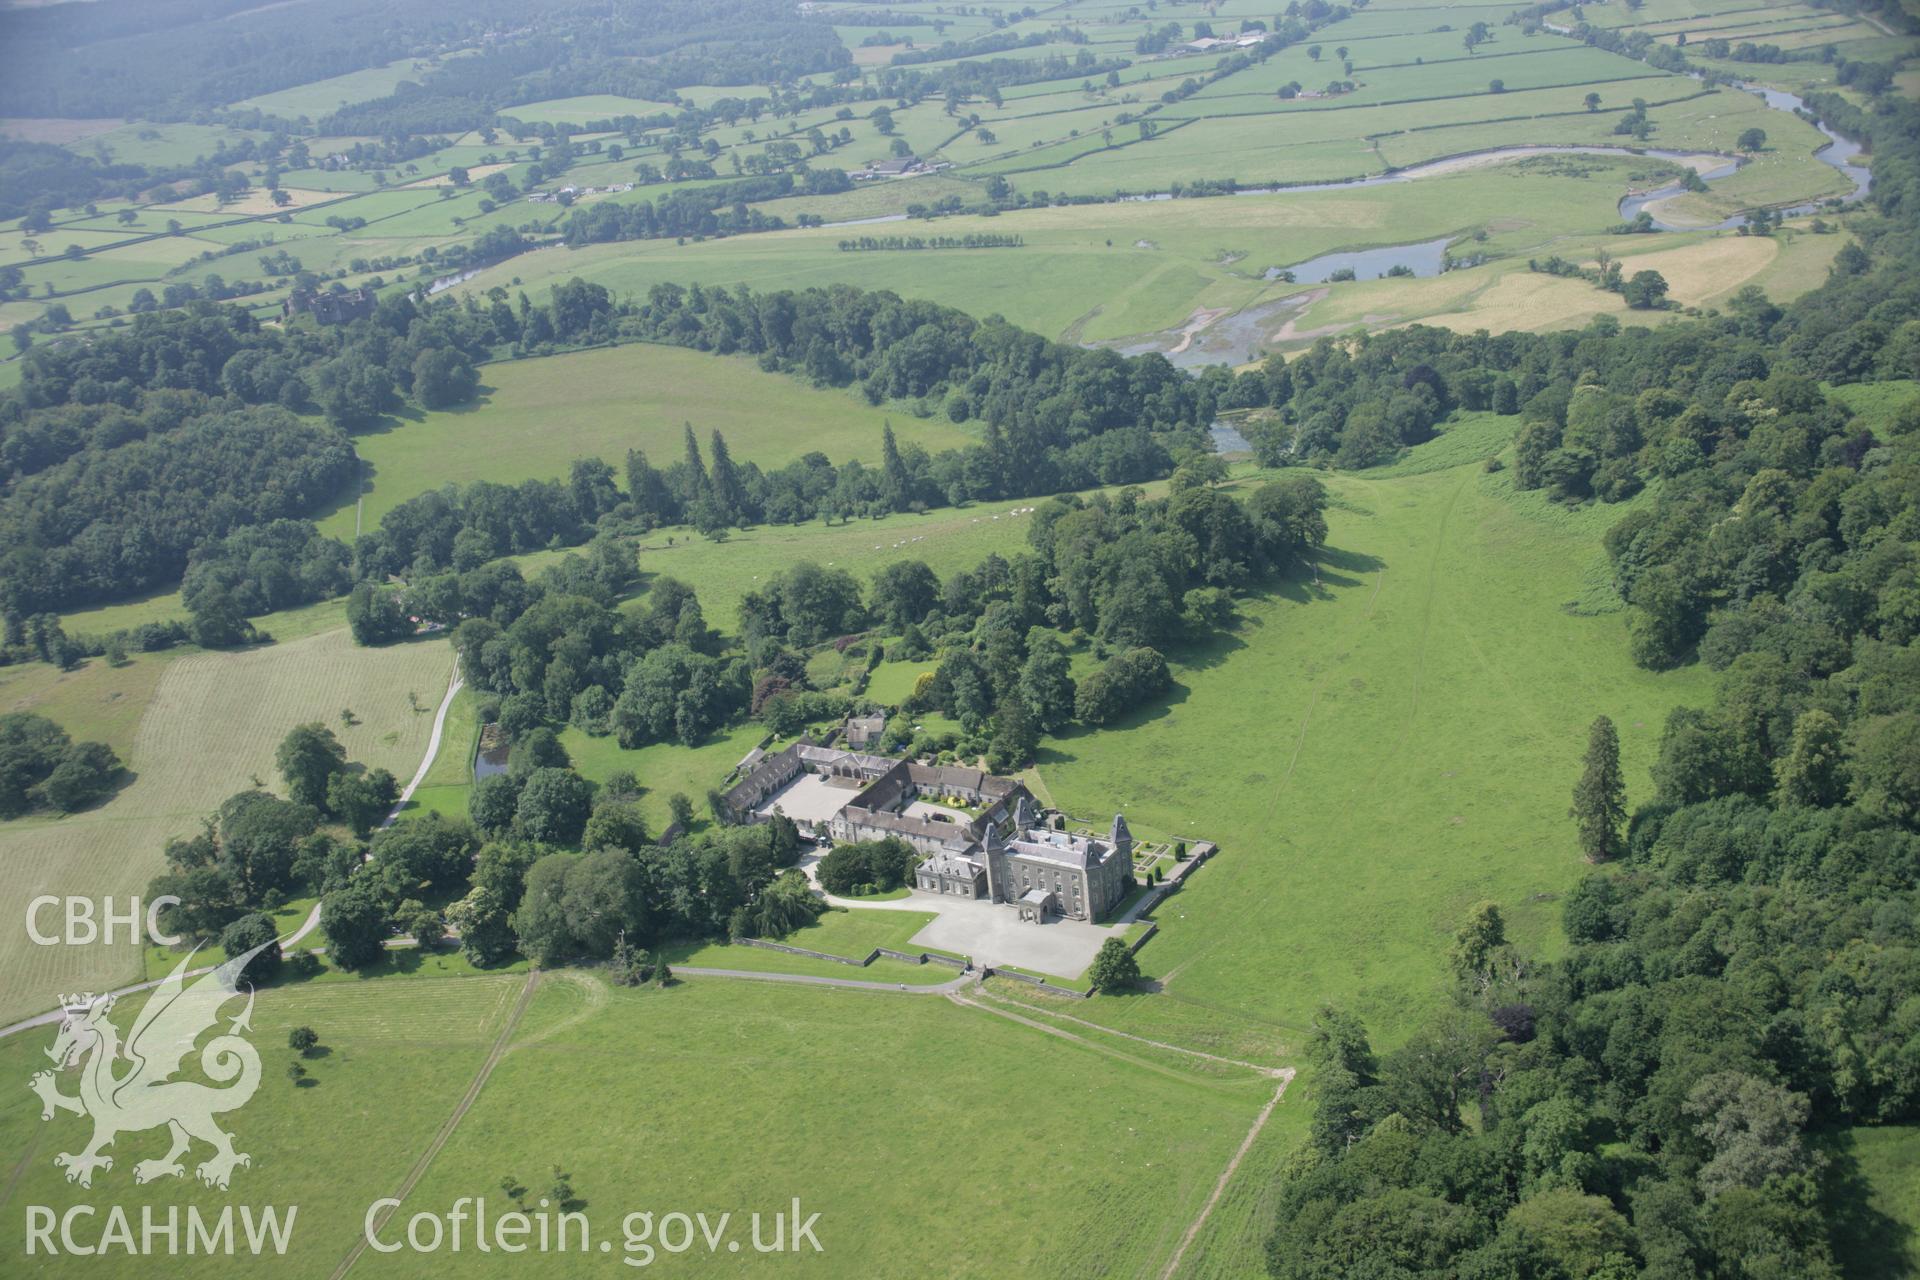 RCAHMW colour oblique aerial photograph of Newton House, (Dinefwr Castle), Llandeilo, in general view from the north-east. Taken on 11 July 2005 by Toby Driver